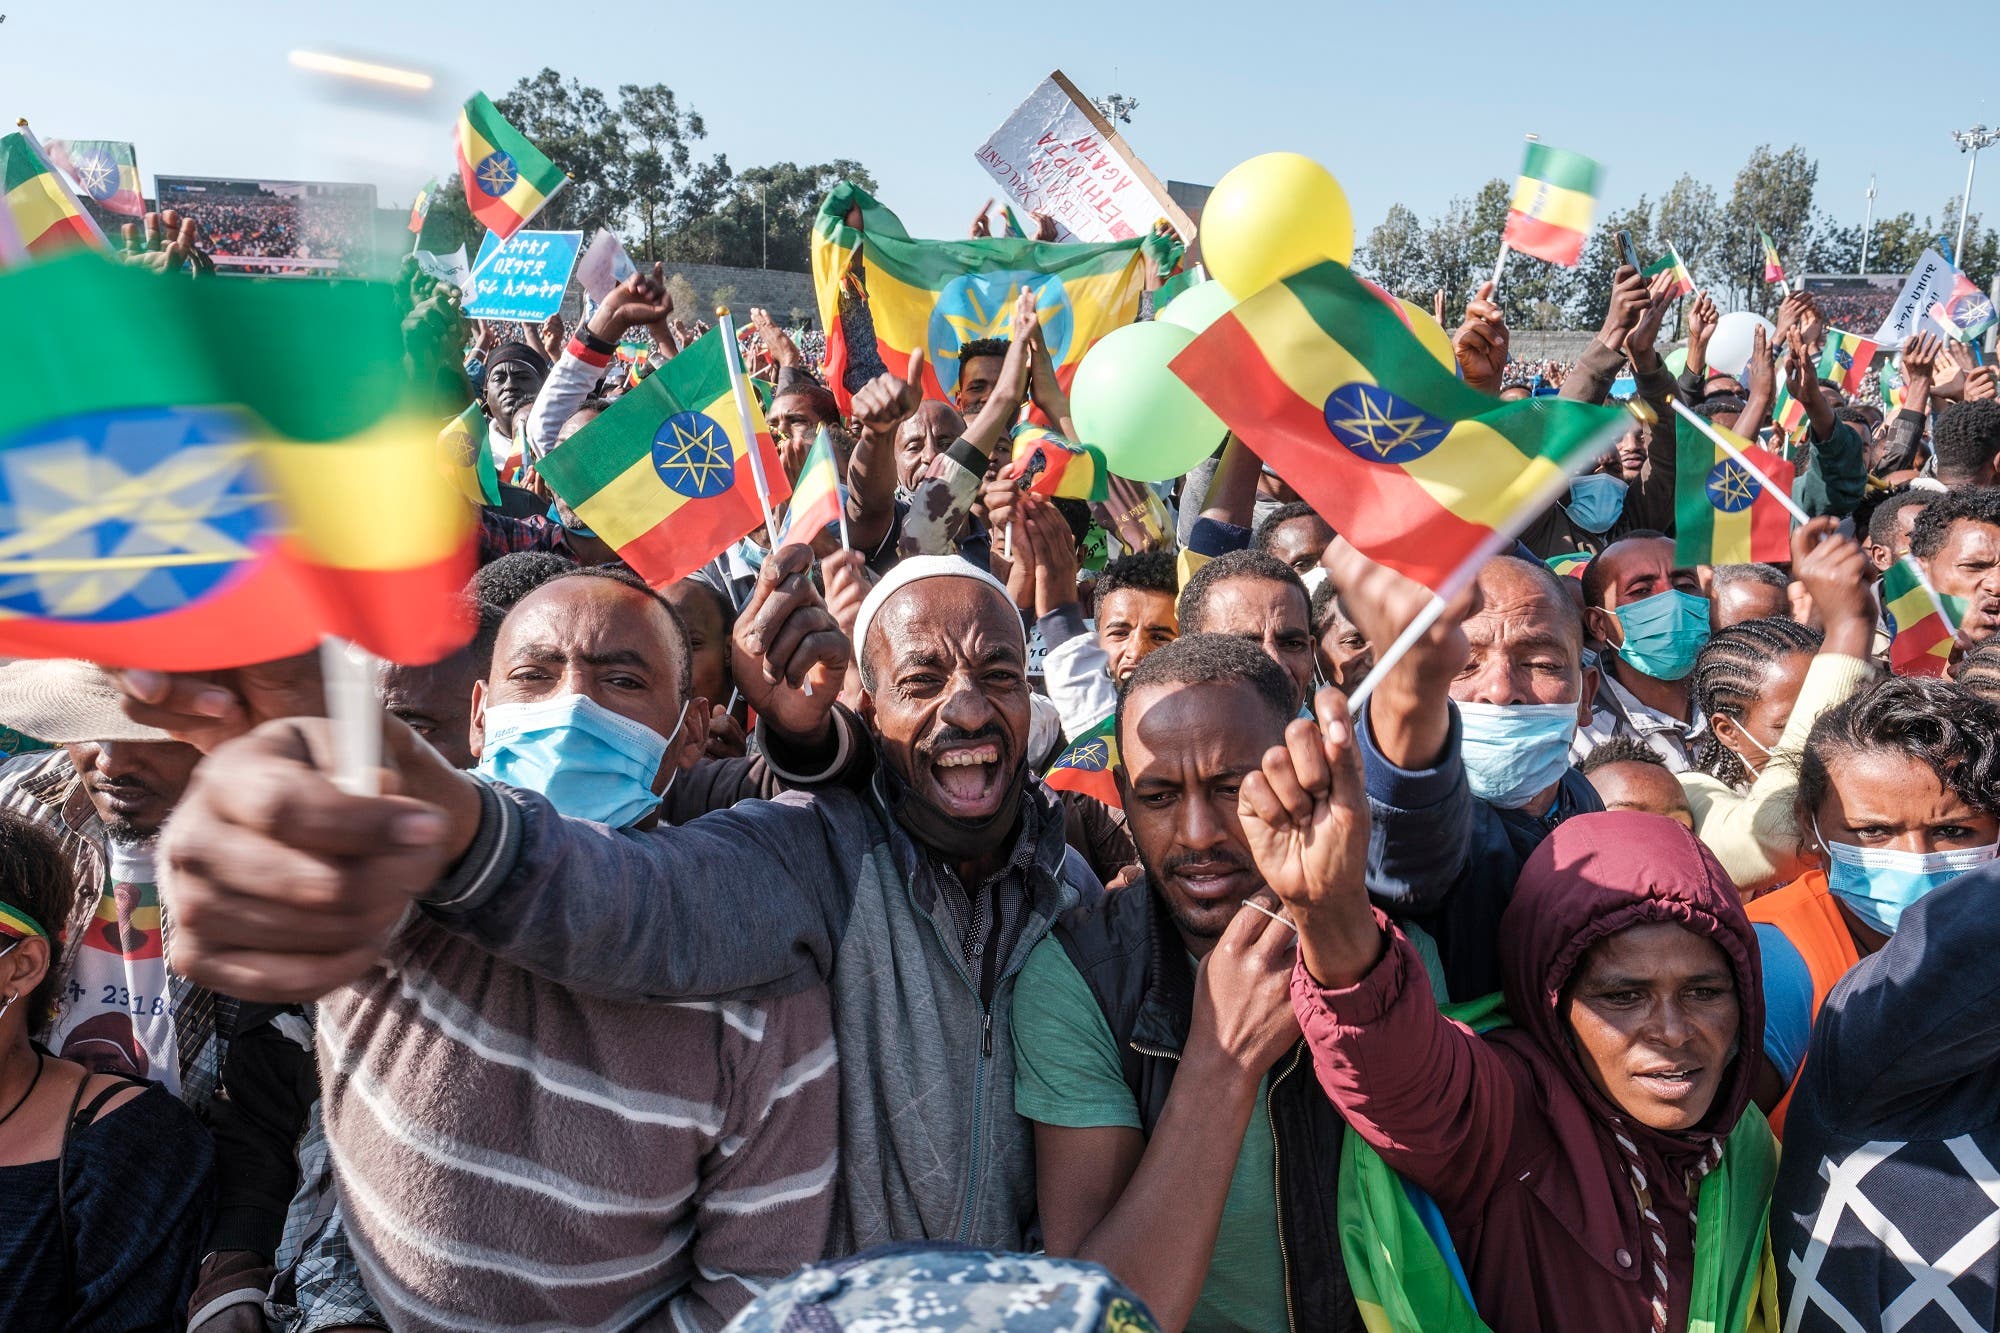 From Addis Ababa on November 7 (AFP)